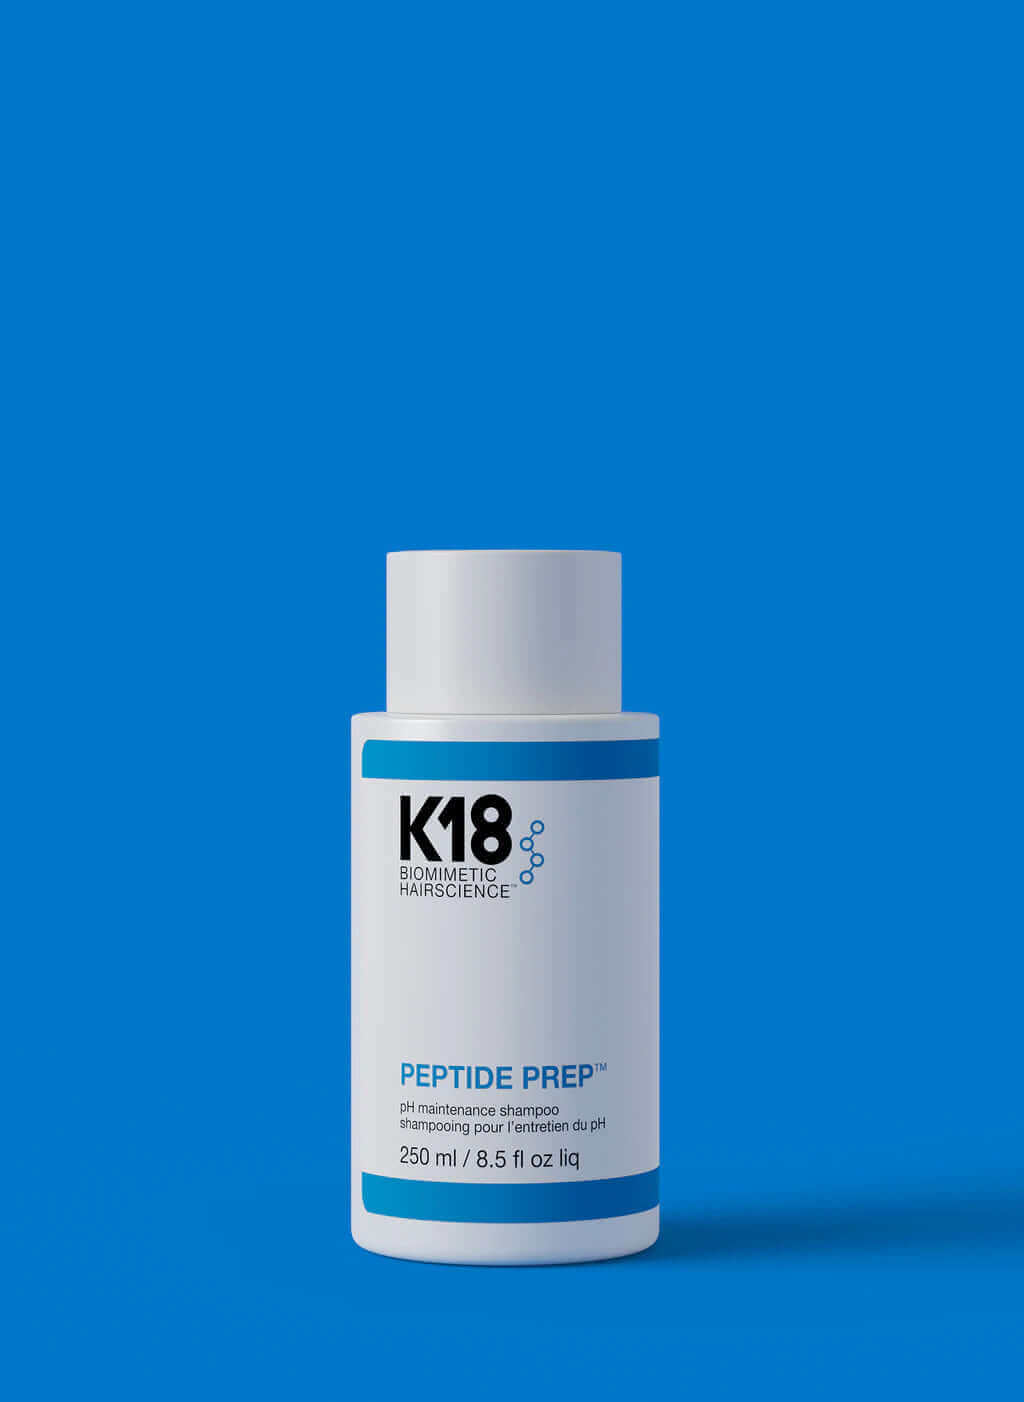 A bottle of K18 DAMAGE SHIELD pH Protective Shampoo featuring K18PEPTIDE™ on a blue background.